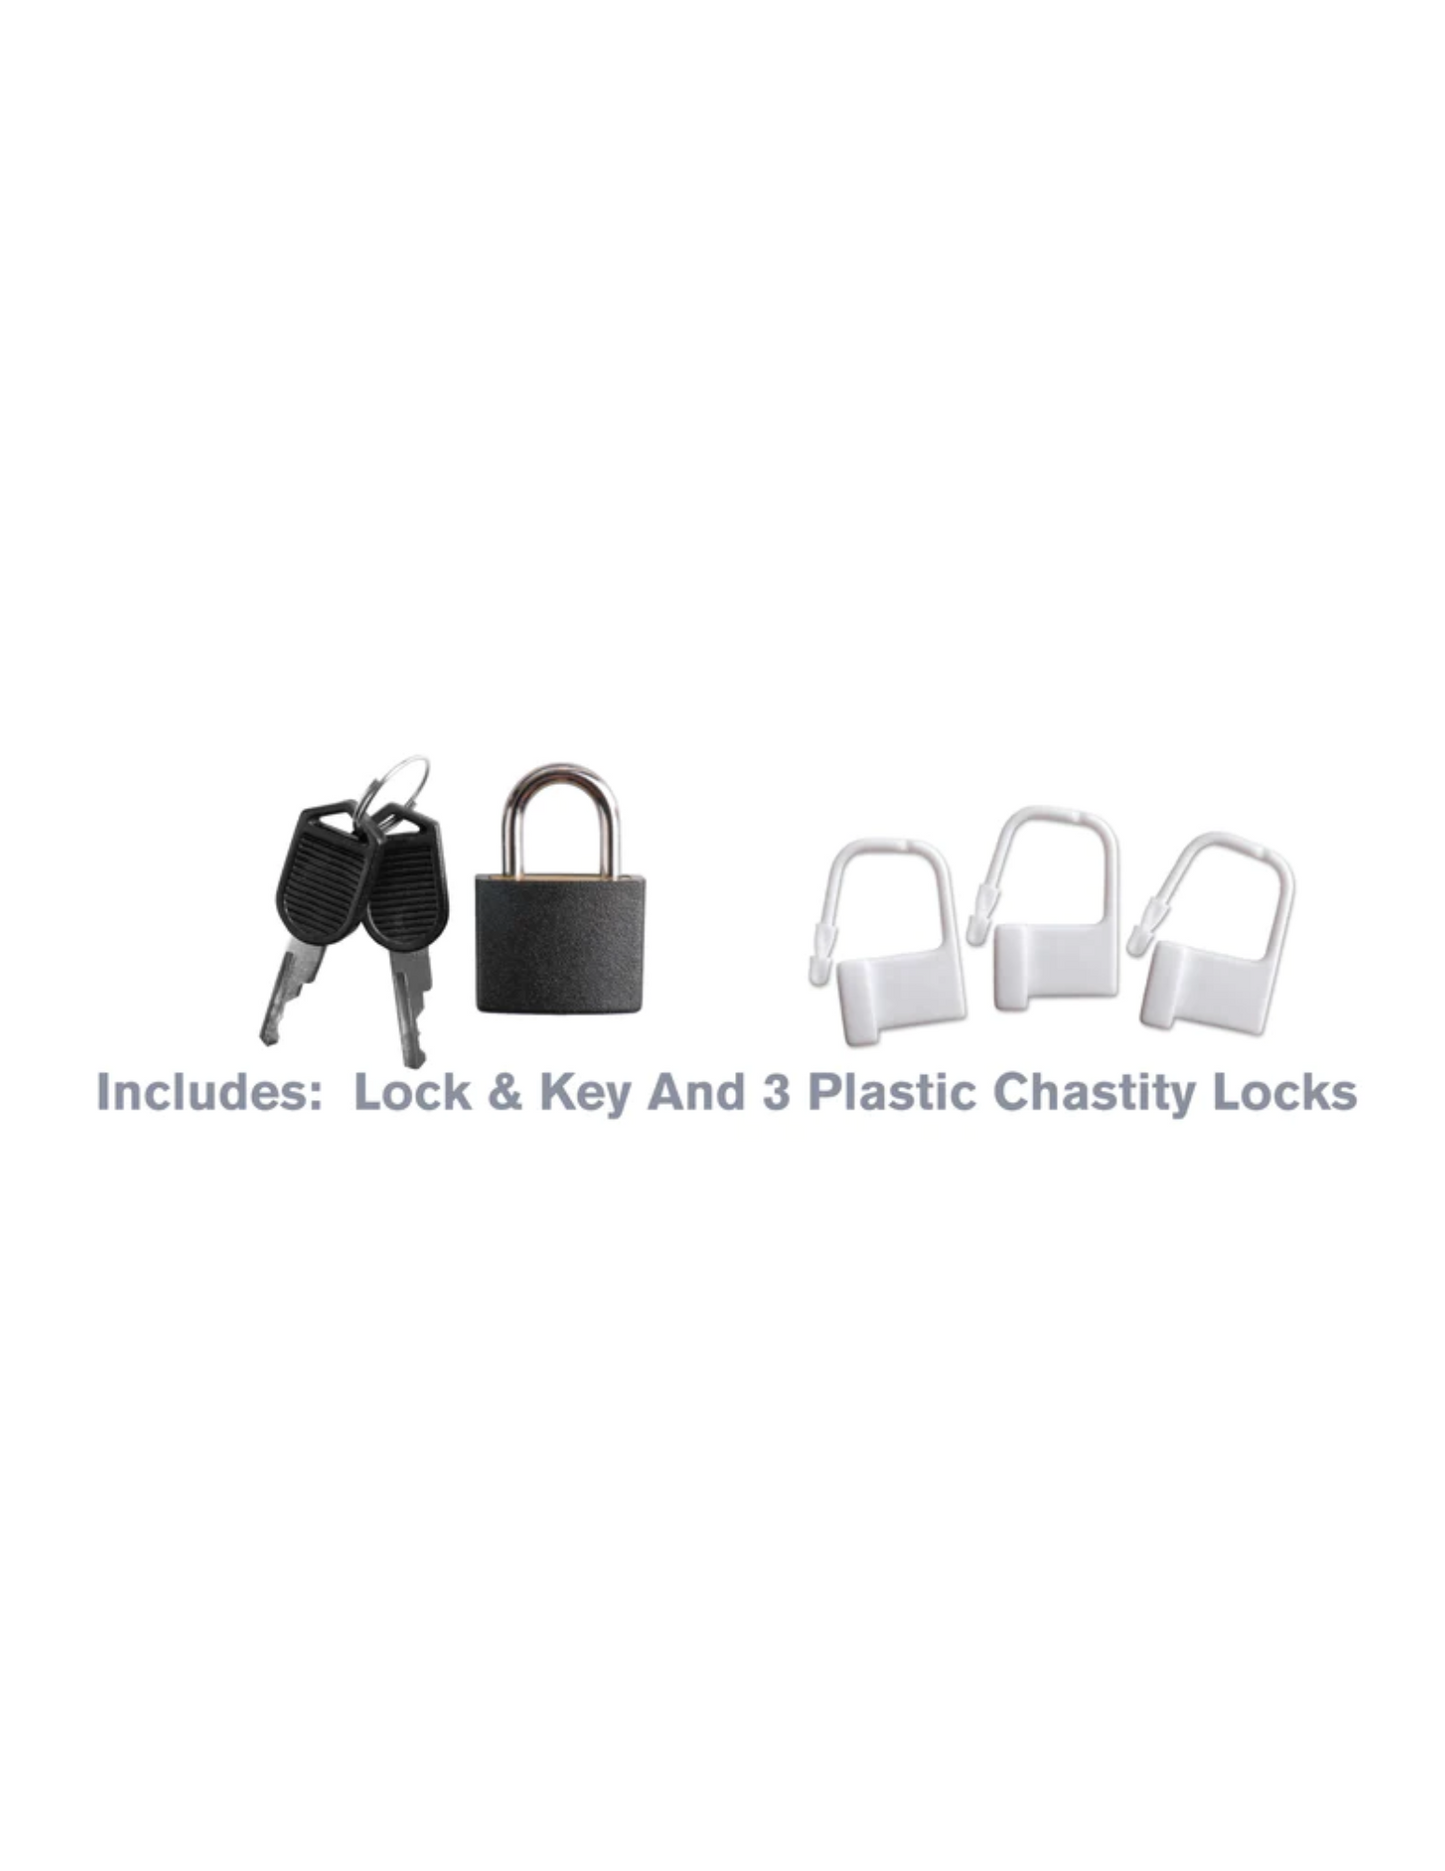 Photo shows the keys and locks that come with the  Extreme Silicone Cock Blocker Cock Ring from Pipedreams.